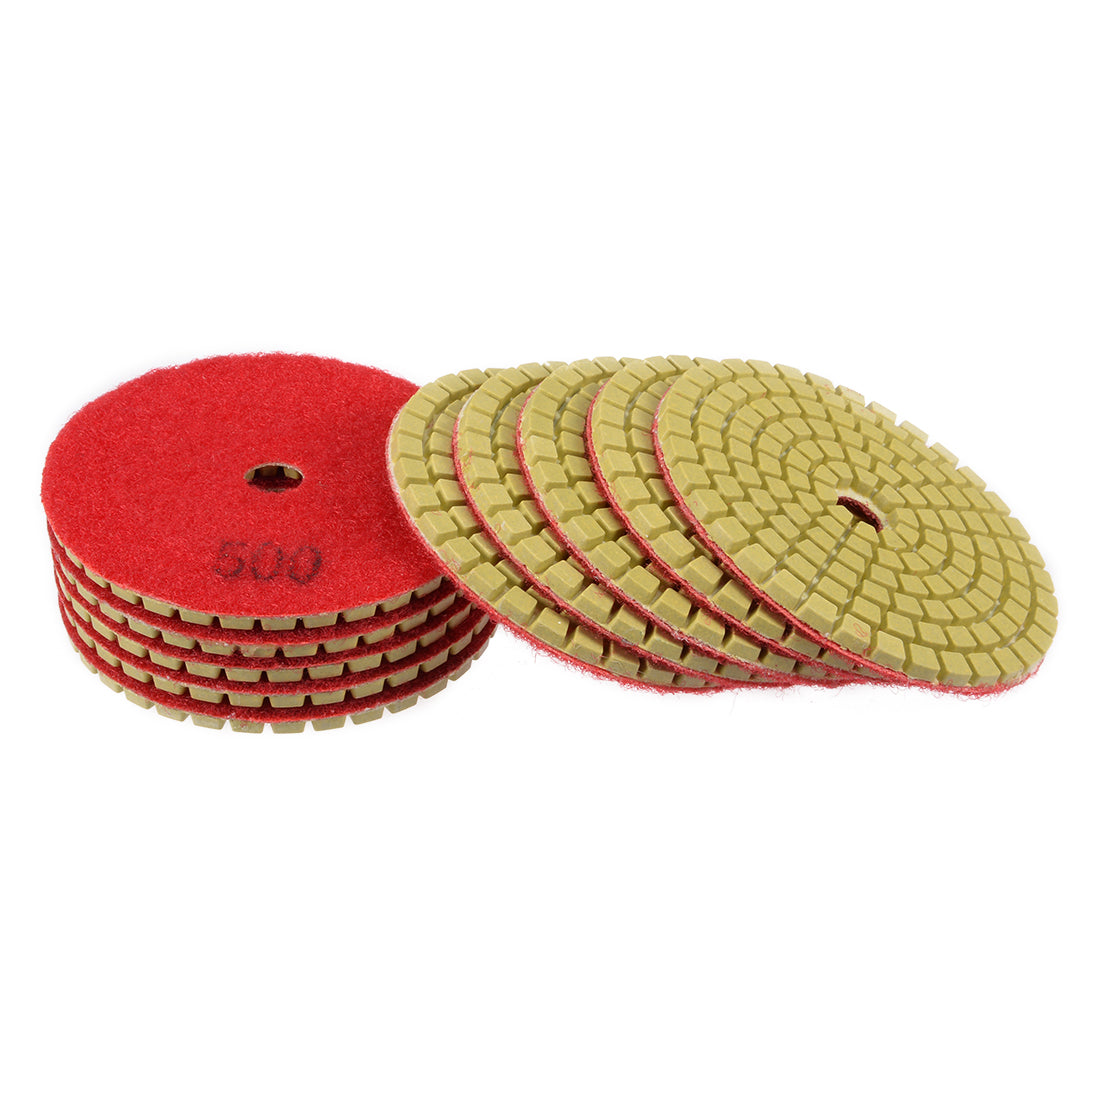 uxcell Uxcell Diamond Polishing Sanding Grinding Pads Discs 3 Inch Grit 500 10 Pcs for Granite Concrete Stone Marble